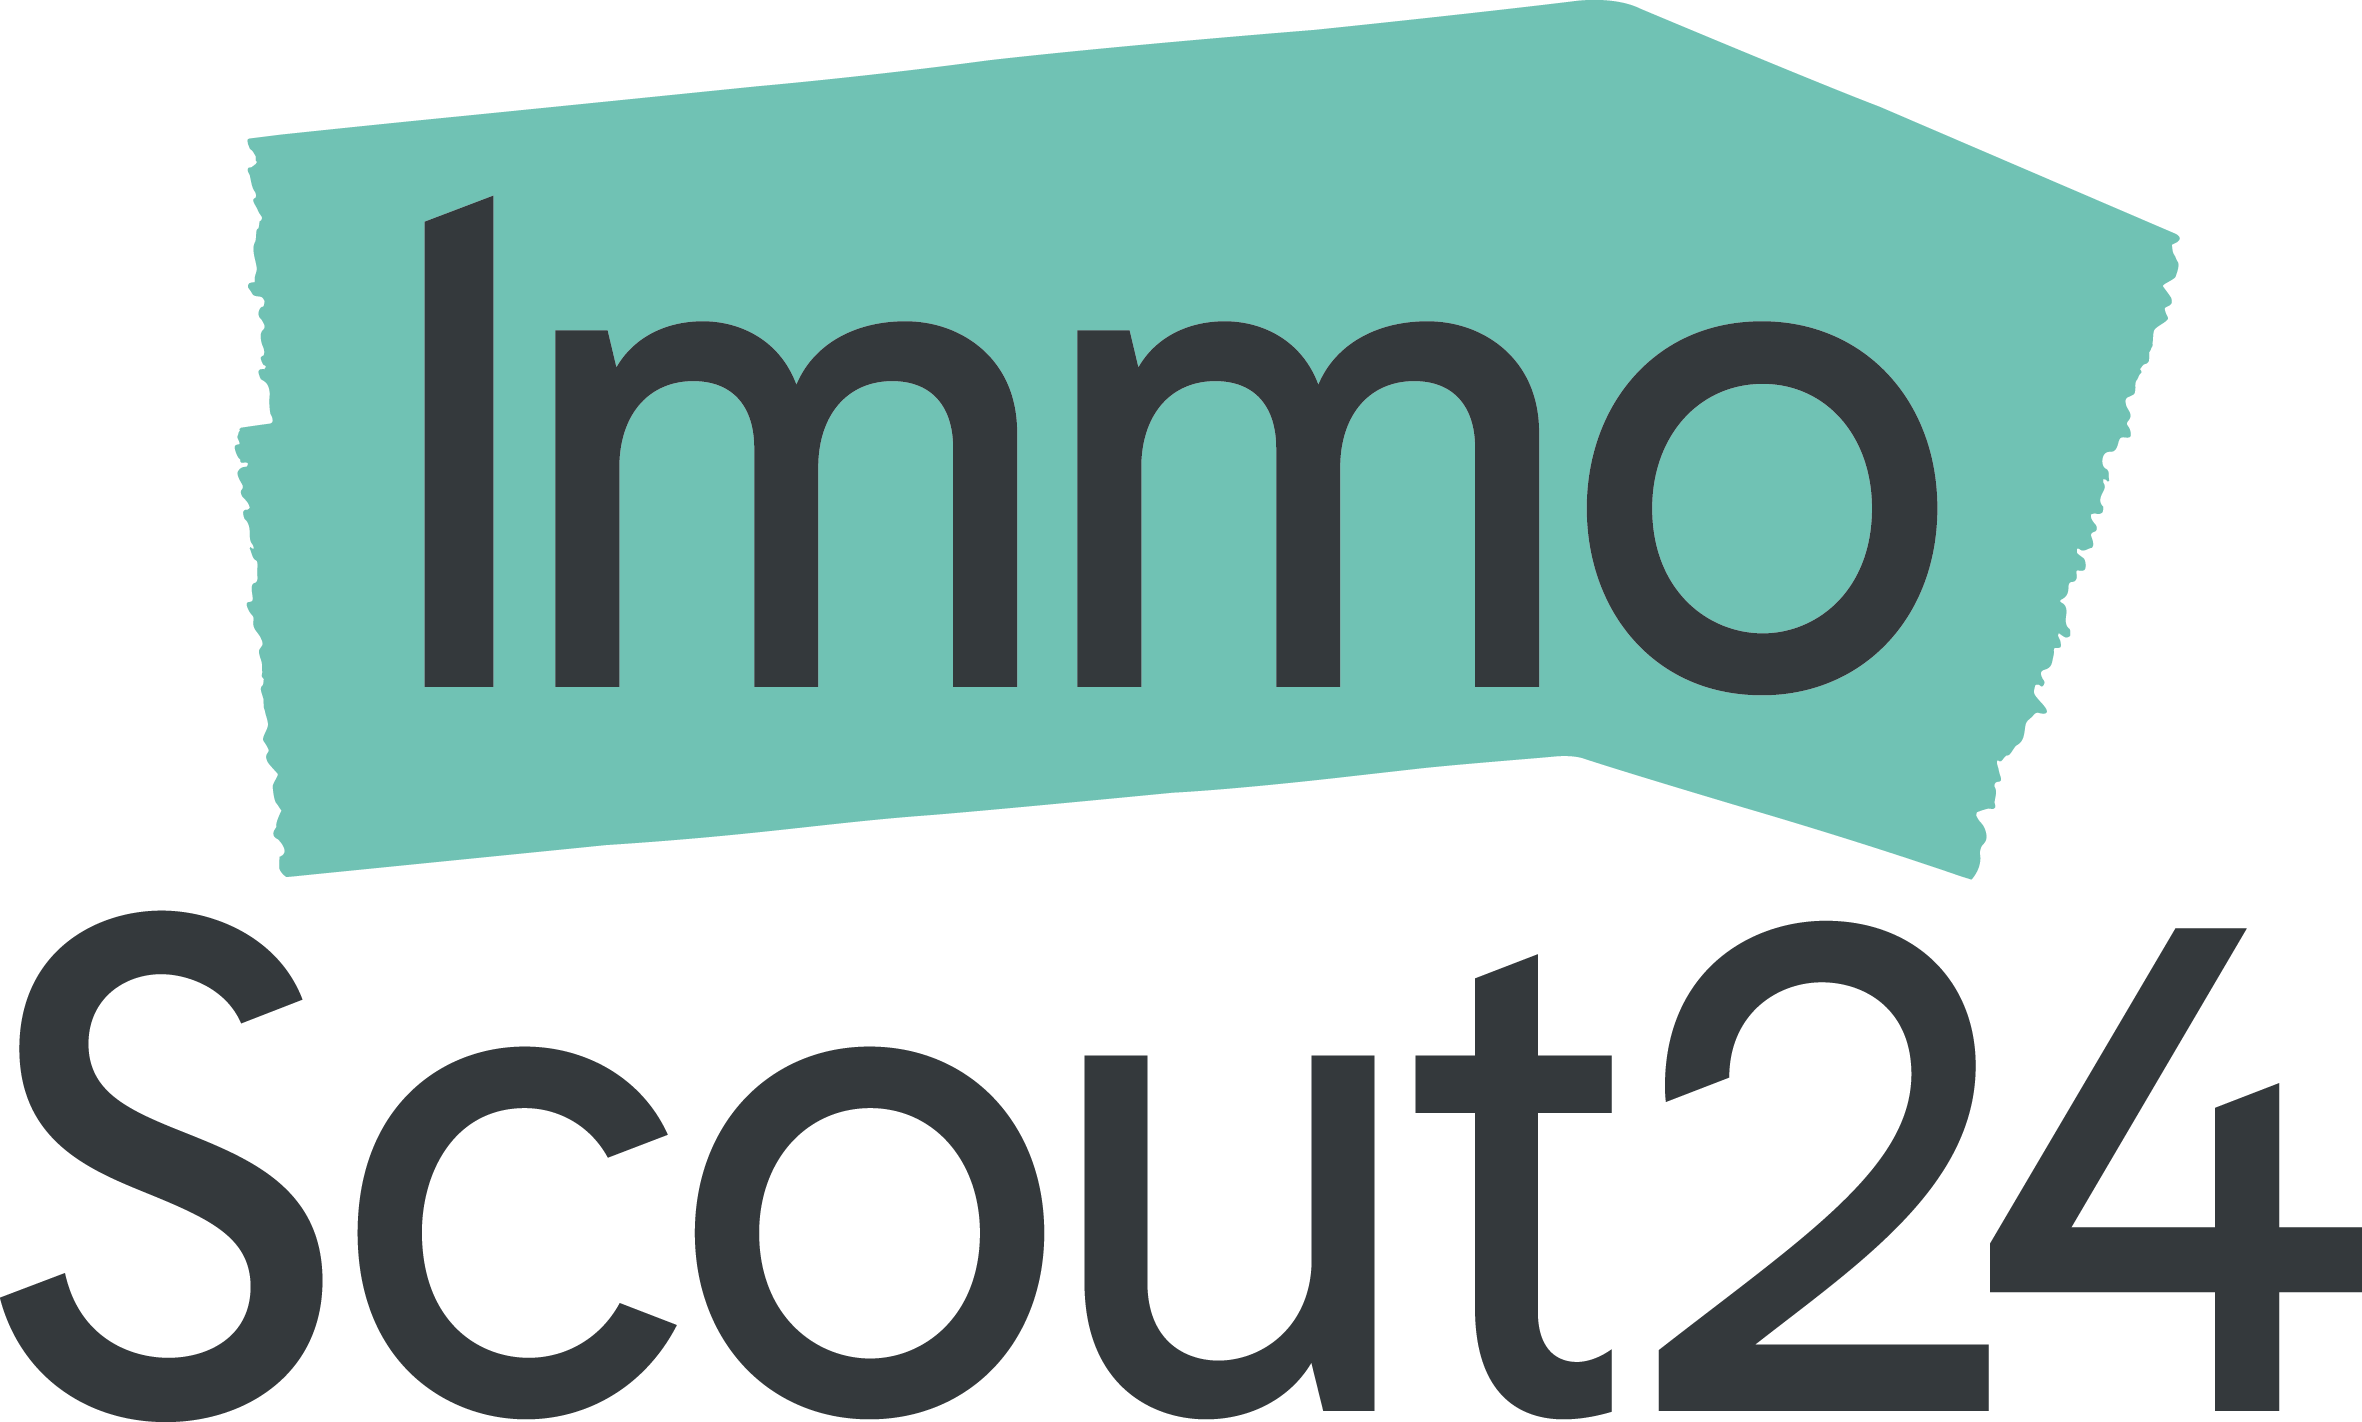 6 Immo Scout24 primary solid